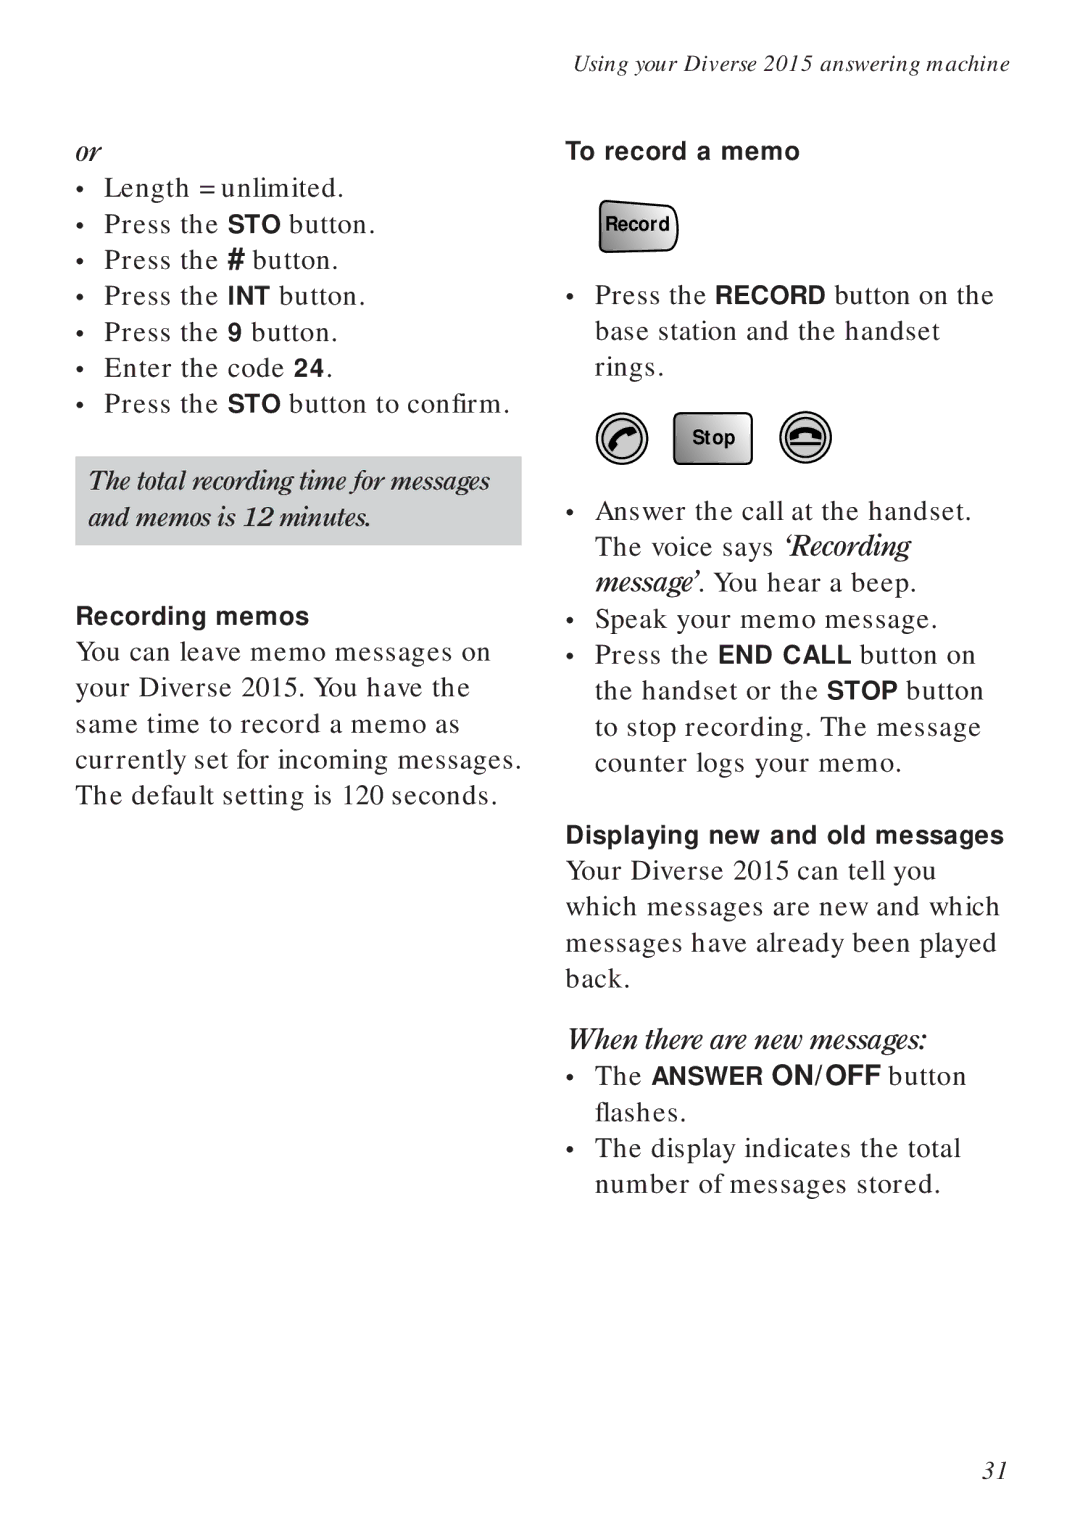 BT Diverse 2015 manual When there are new messages, Recording memos, To record a memo, Displaying new and old messages 